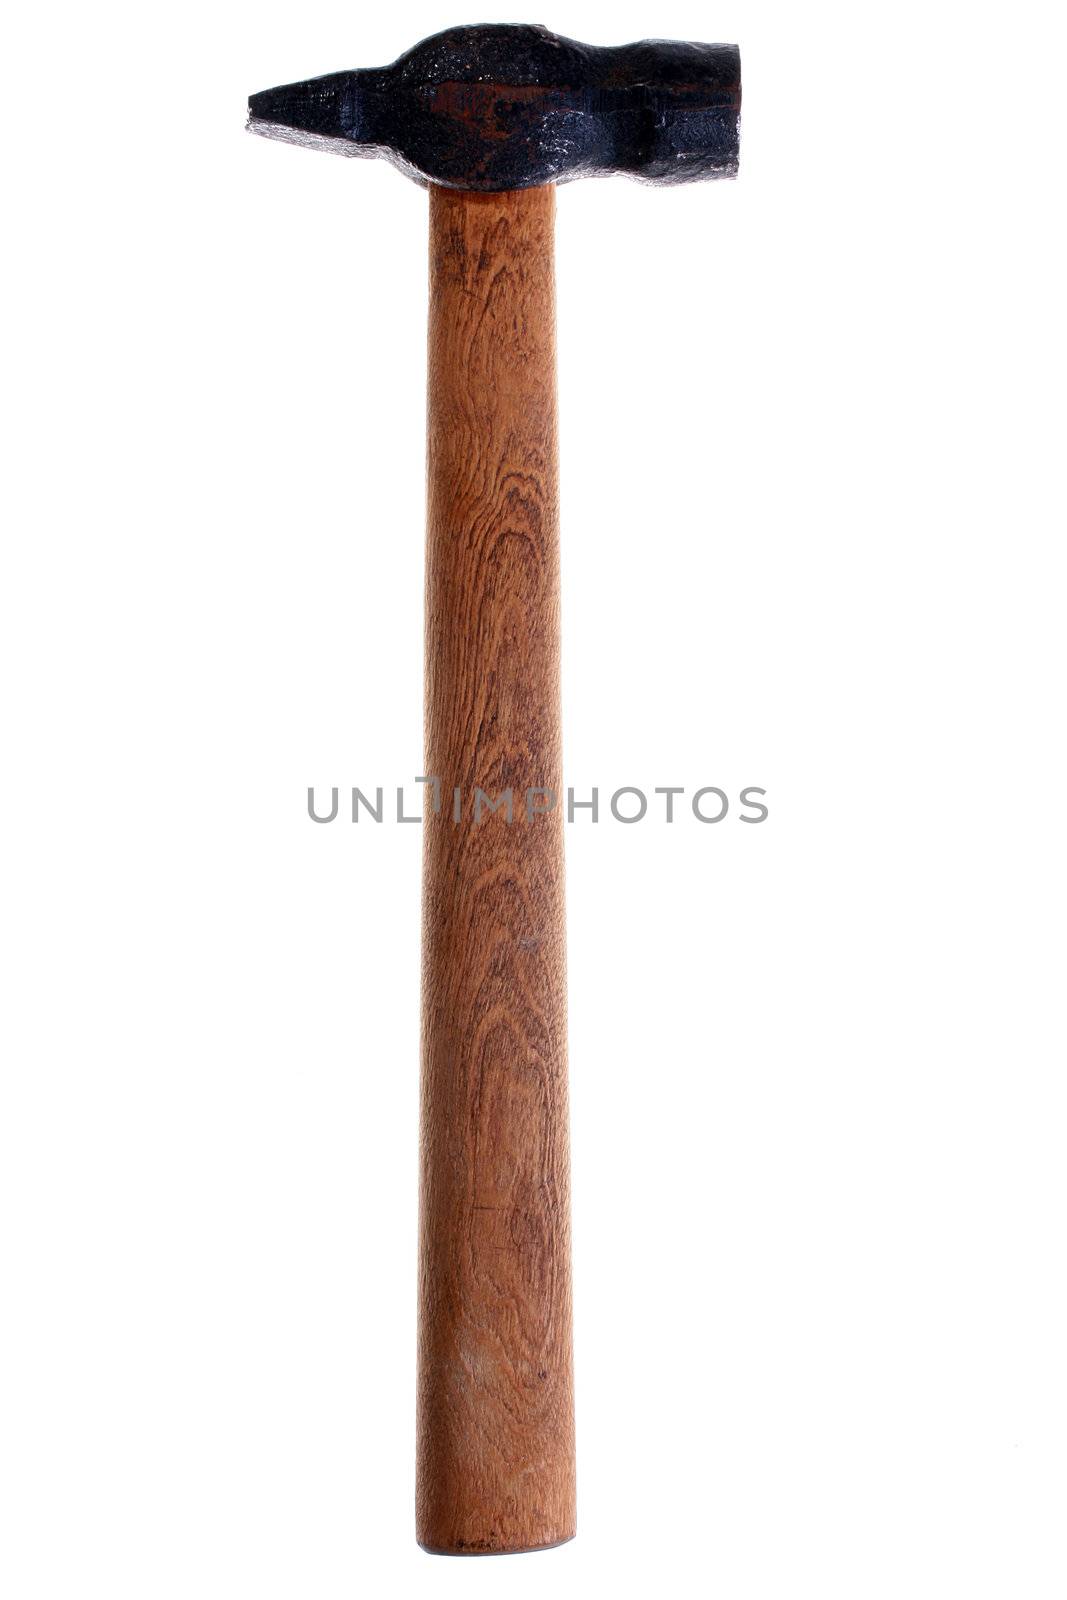 Ancient building hammer with the wooden handle on a white background.